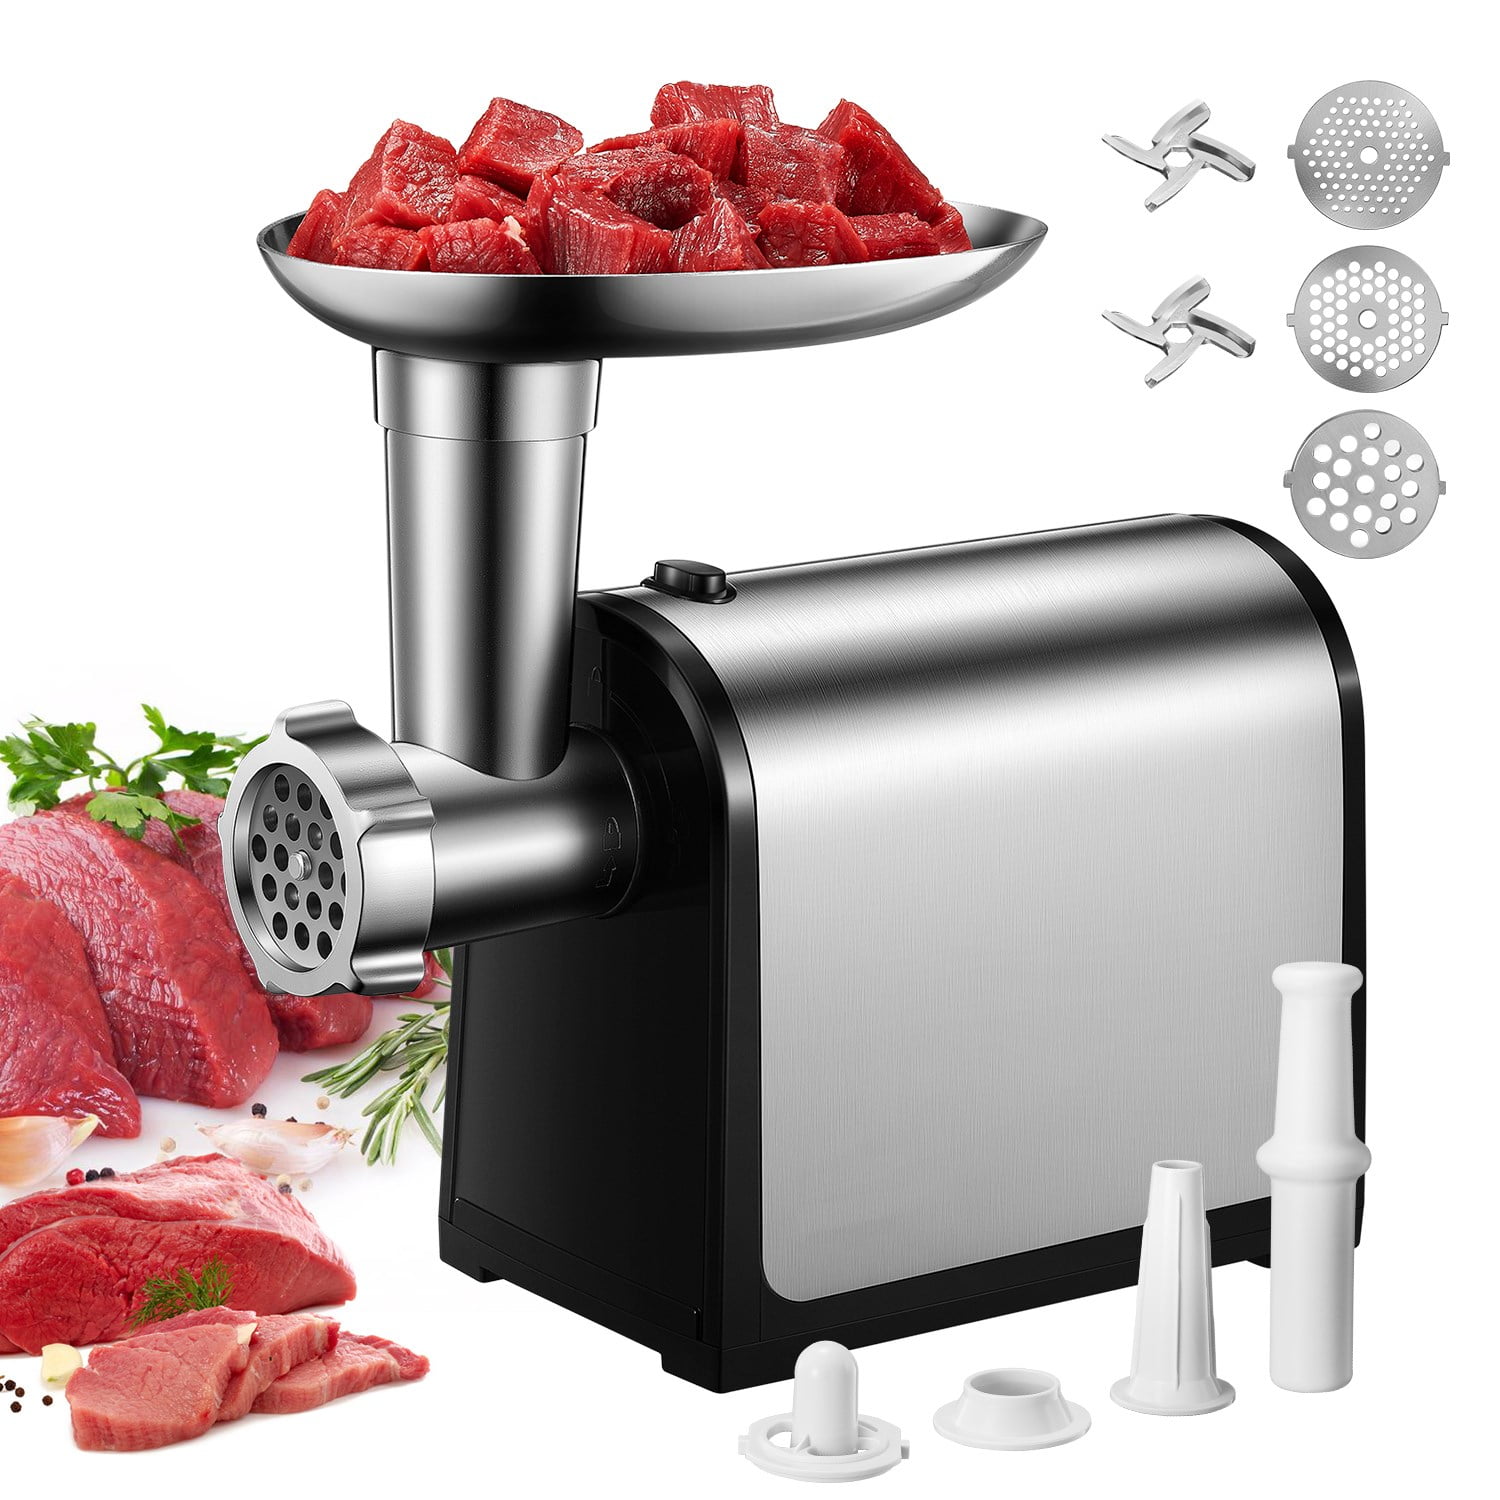 Stainless Steel Housing Electric Meat Grinder 【2000W Max】 Meat Mincer & Sausage Stuffer with 3 Grinding Plates,Sausage & Kubbe Kits 